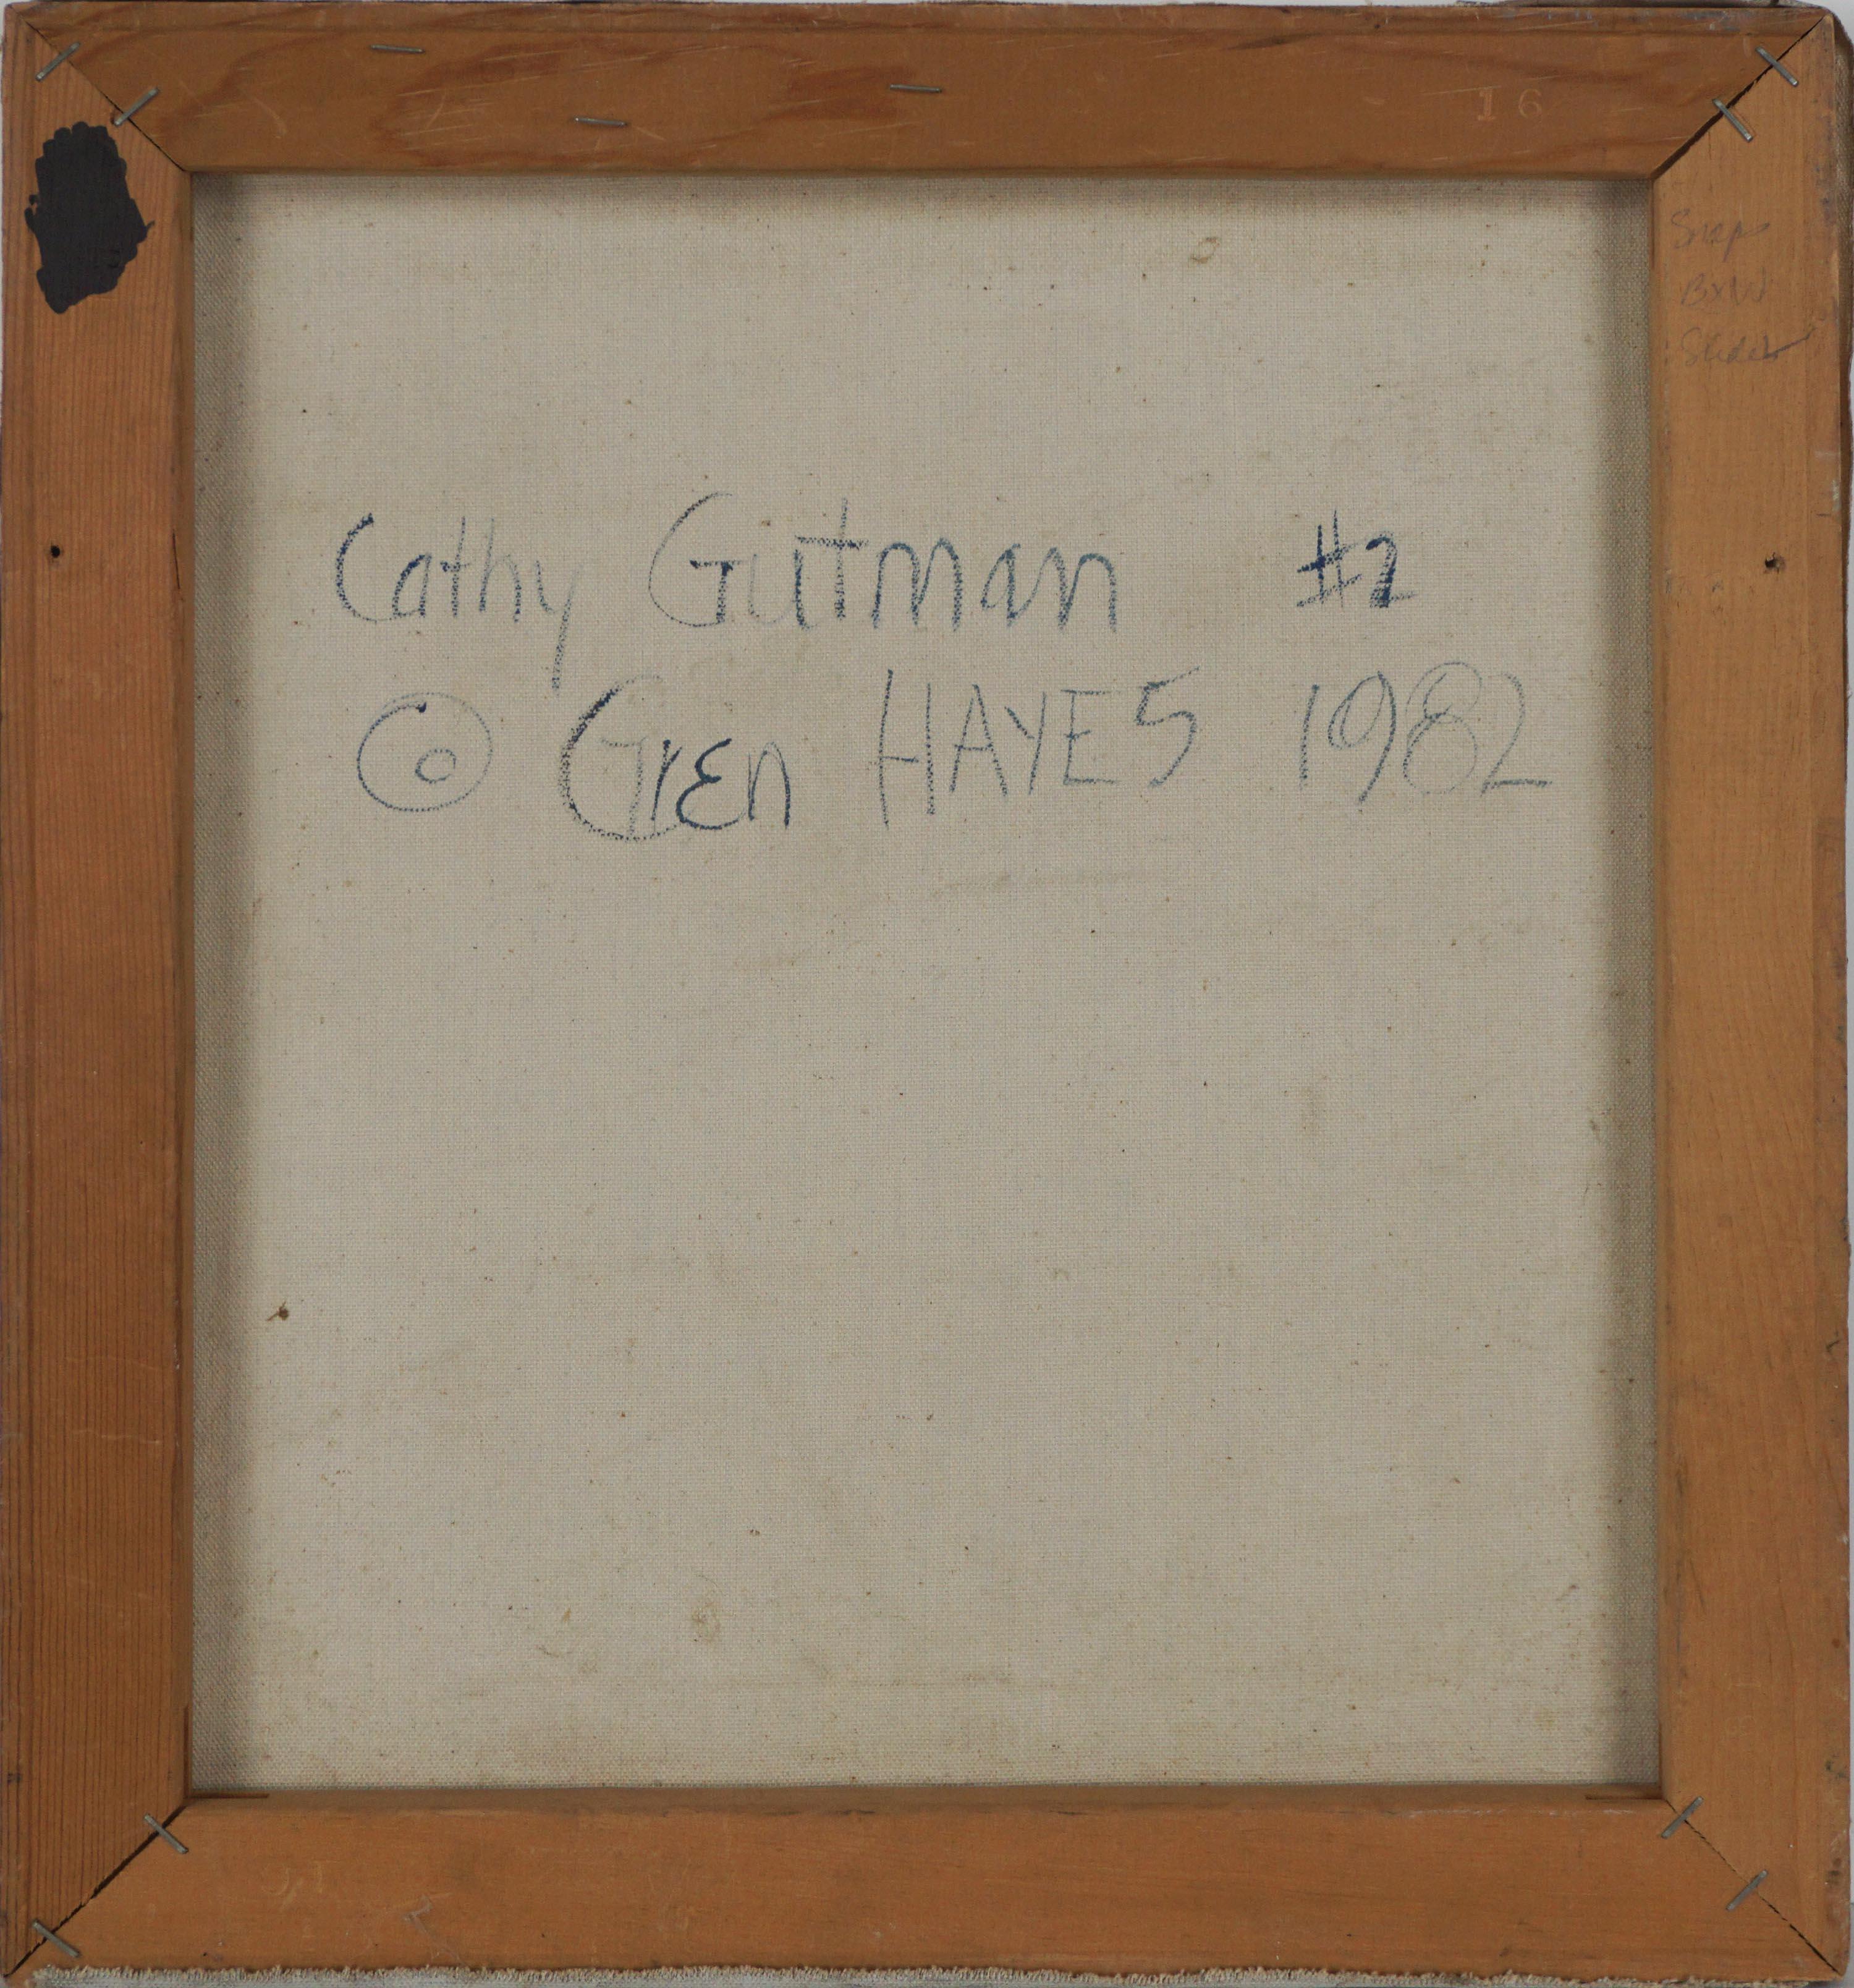 Modern portrait of young girl named Cathy Gutman by American painter, Patricia Gren Hayes (b. 1932), 1982. 

Signed and dated lower left corner and on verso
Provenance: Purchased as part of larger collection of artist's work from the estate of Larry